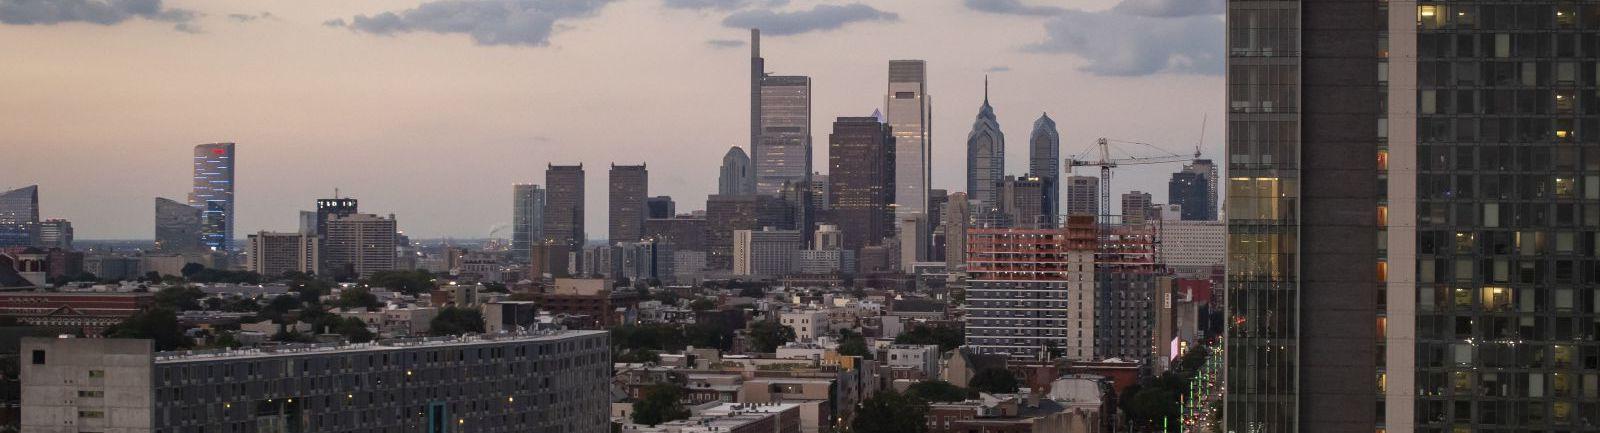 The Philadelphia skyline as seen from Temple Main Campus.